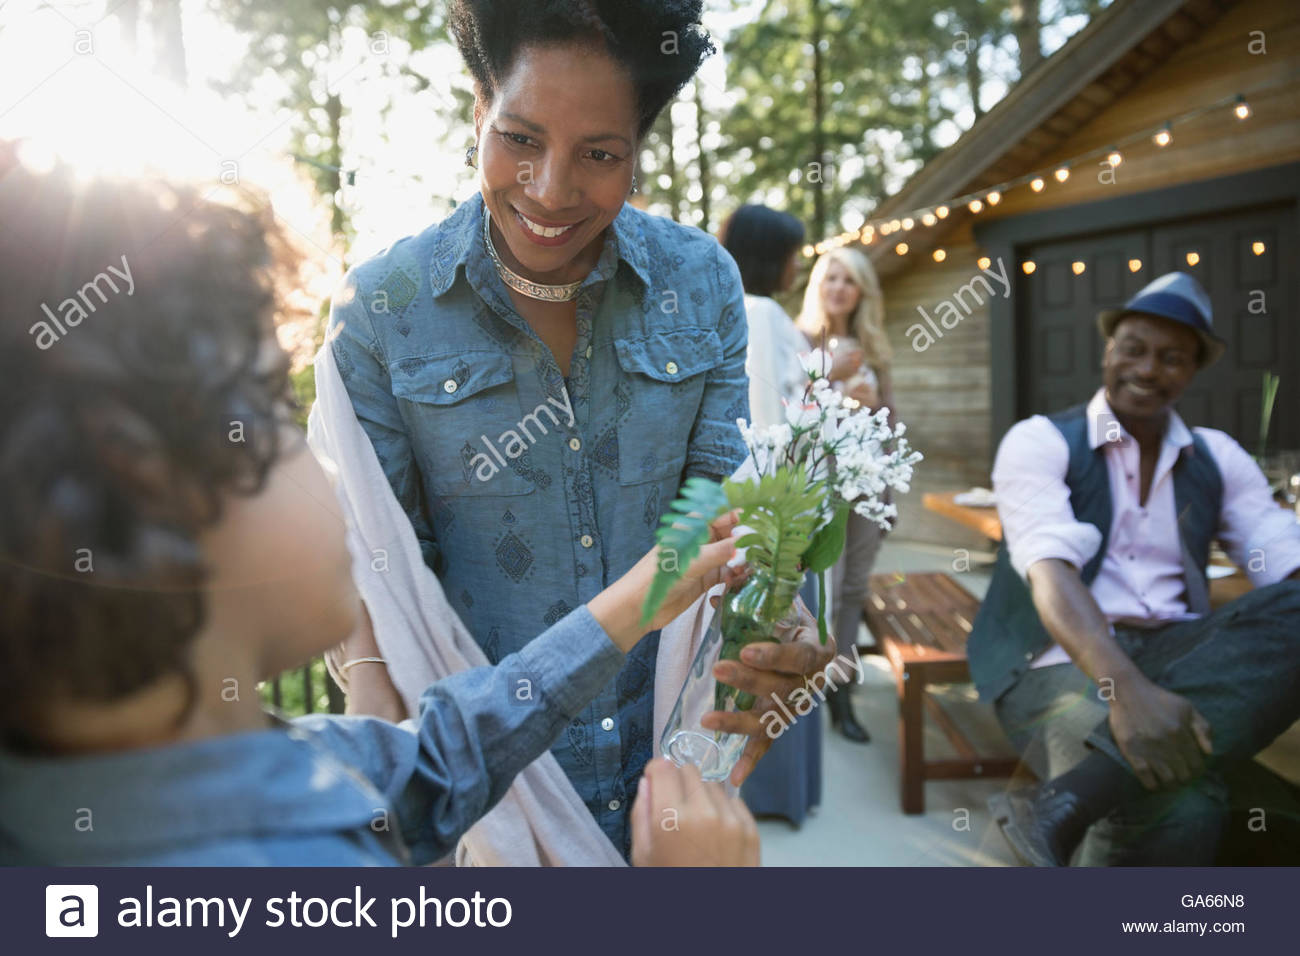 Grandson giving grandmother fresh picked flowers at balcony party Stock Photo